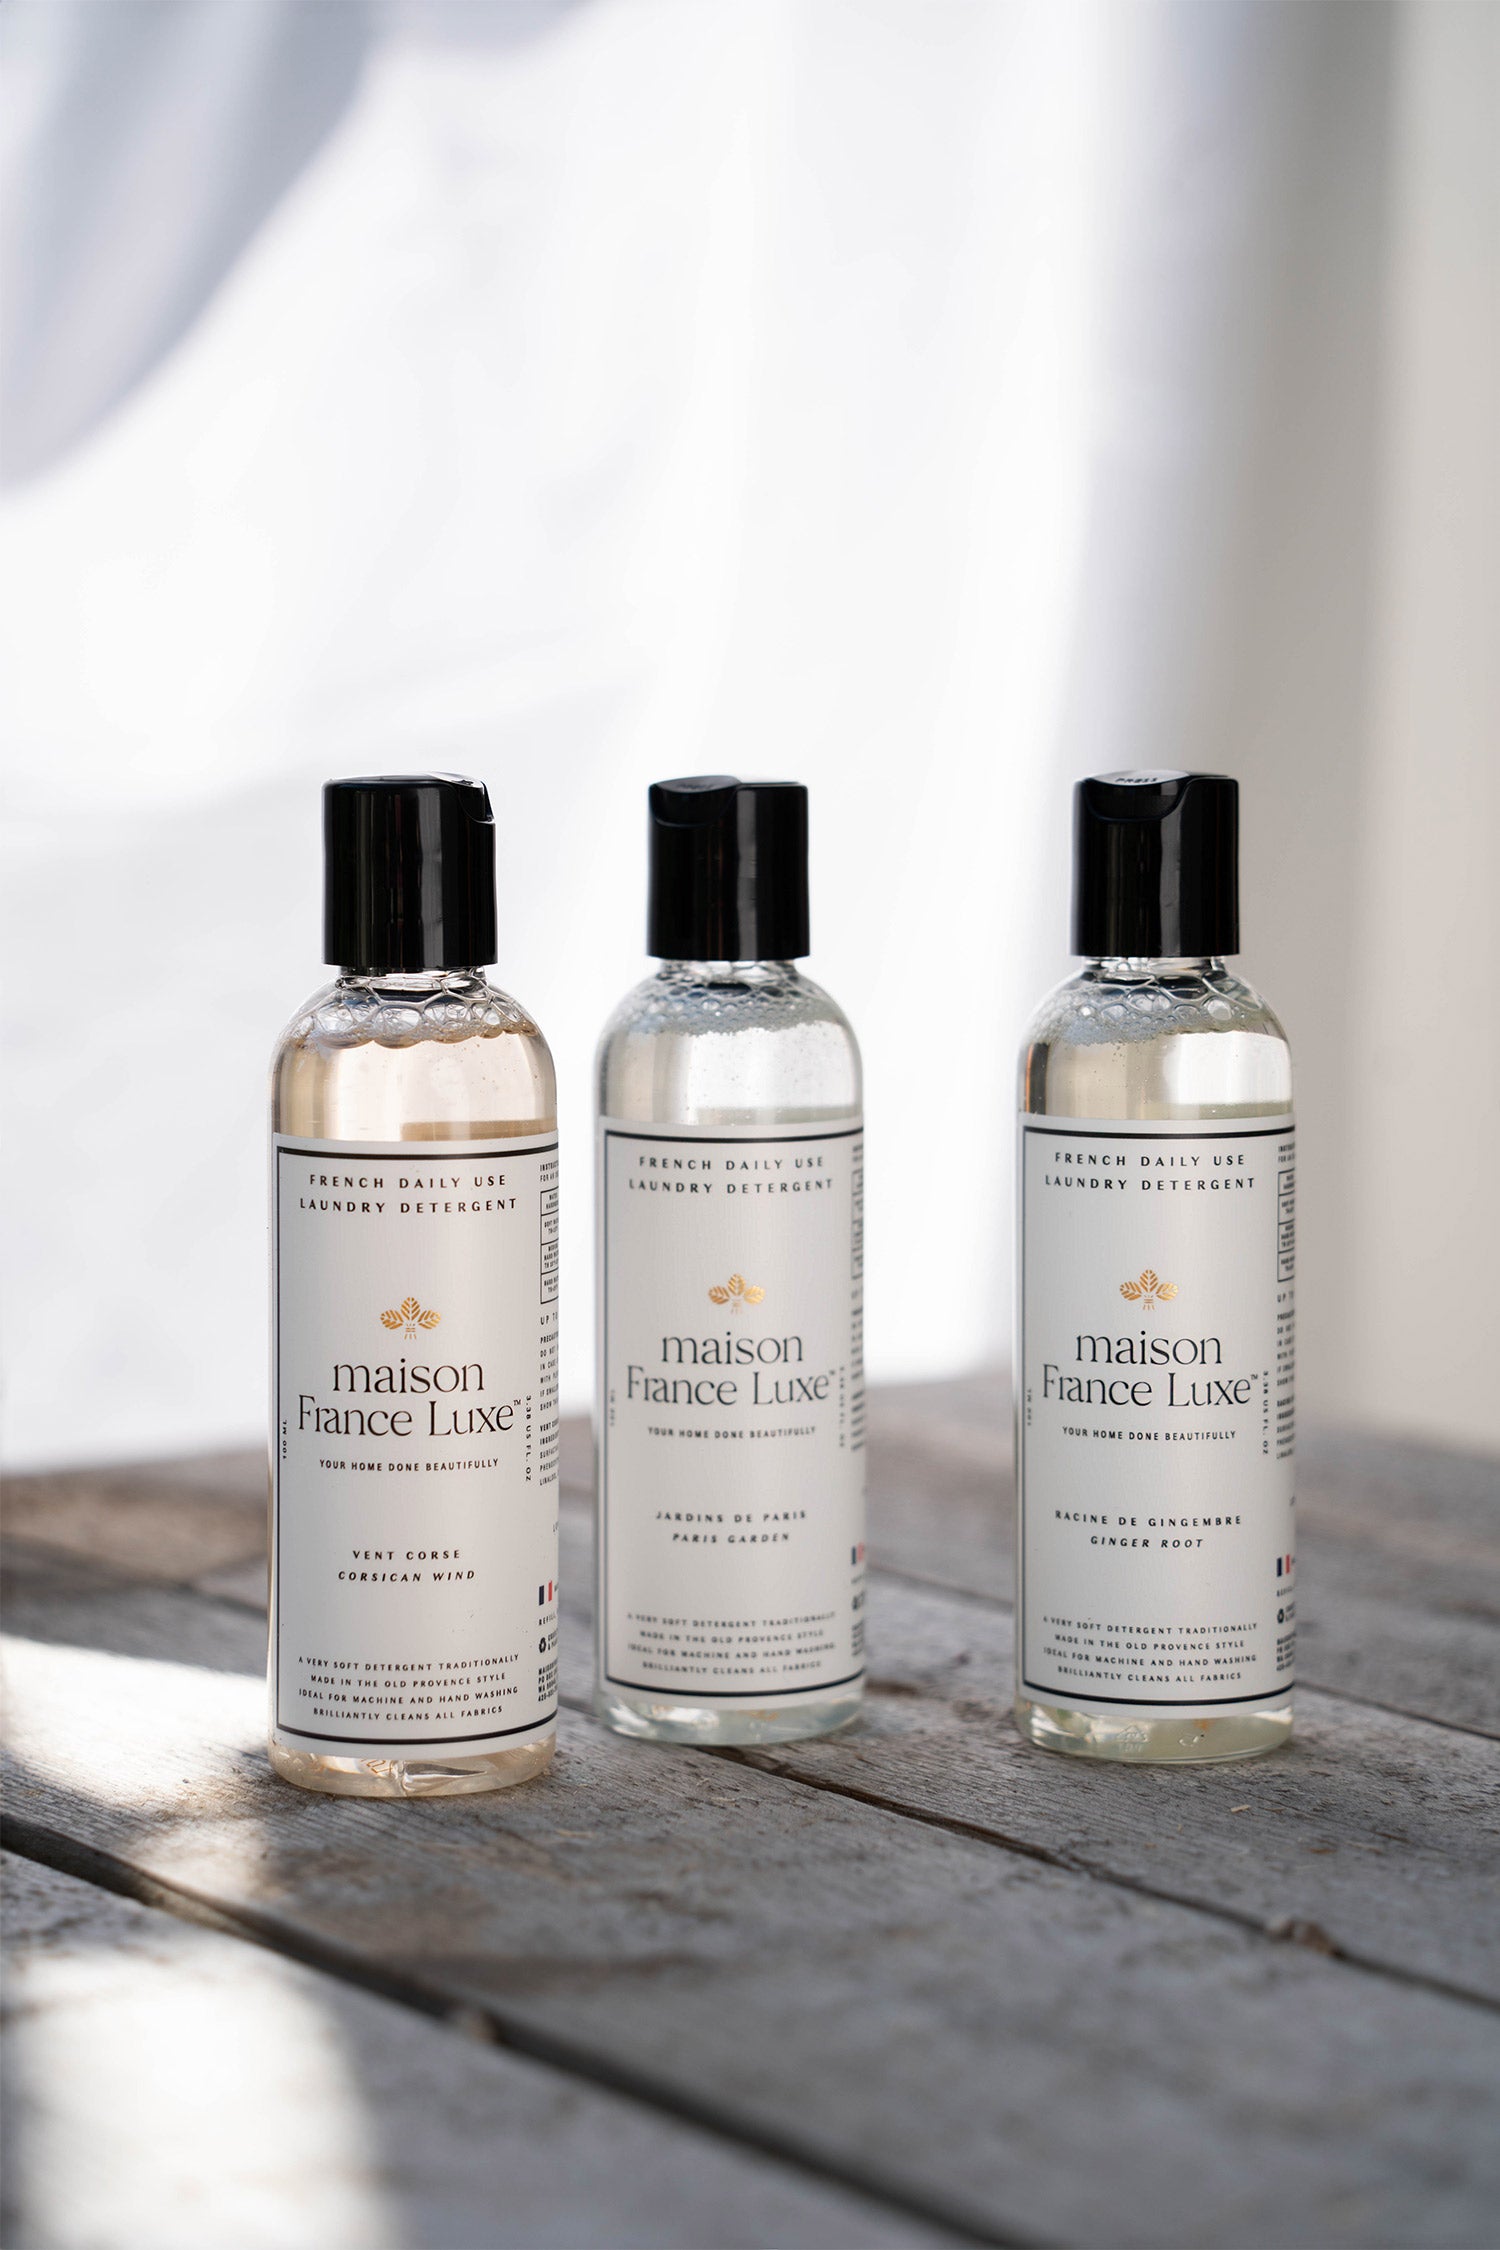 French laundry soap in travel sizes. Plant based formulas are eco friendly with luxurious scents.